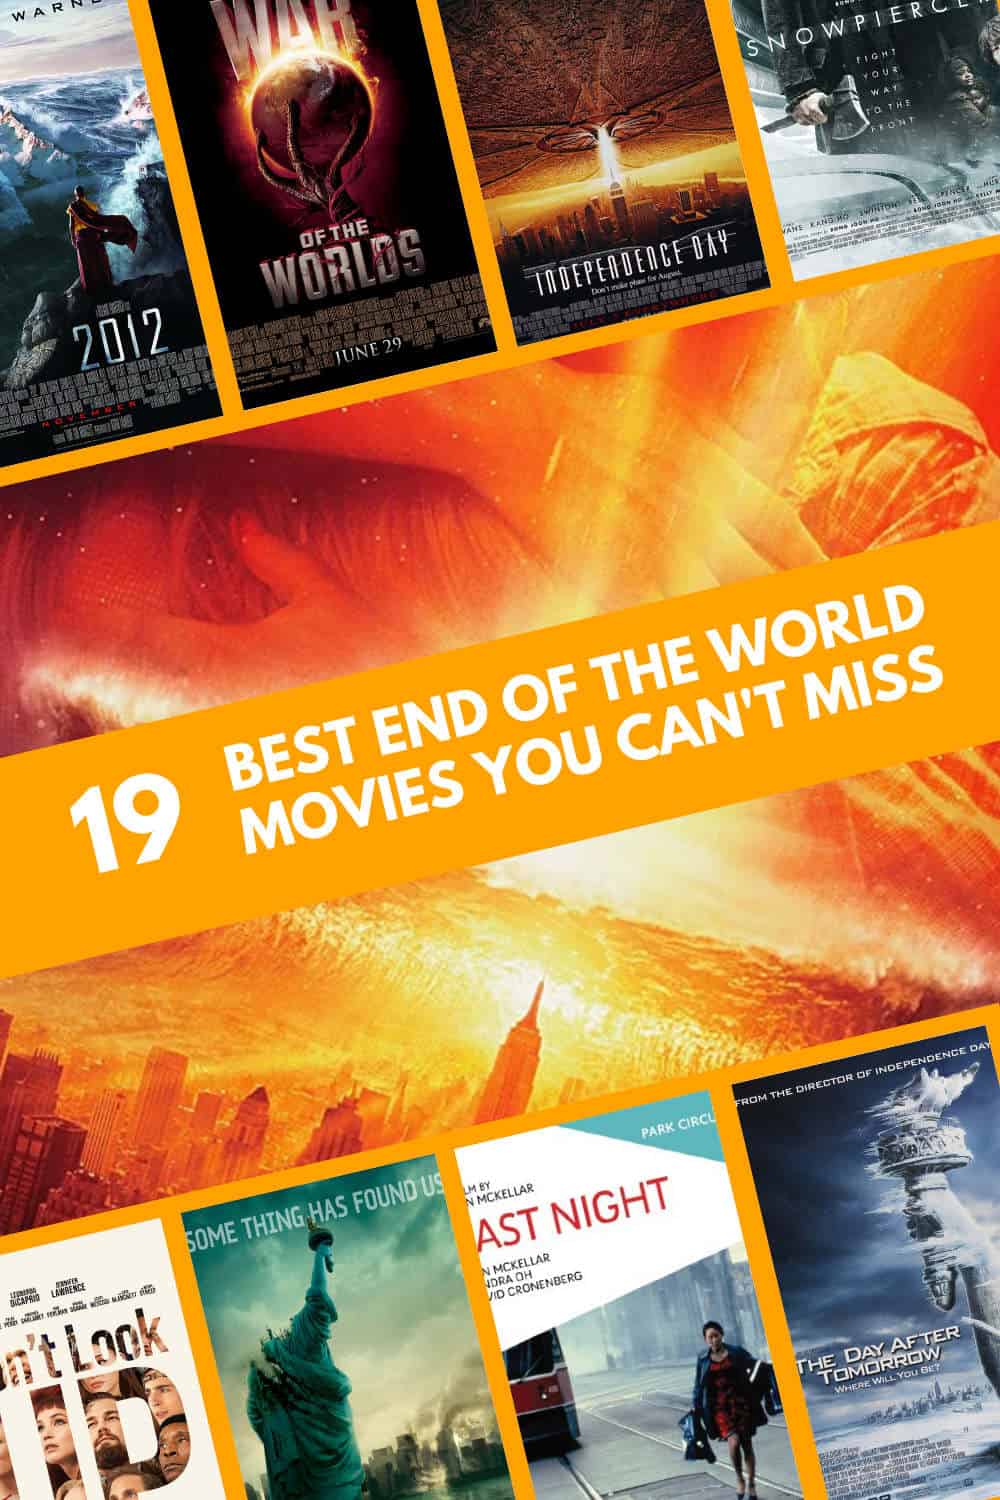 End of the World Movies You Can't Miss